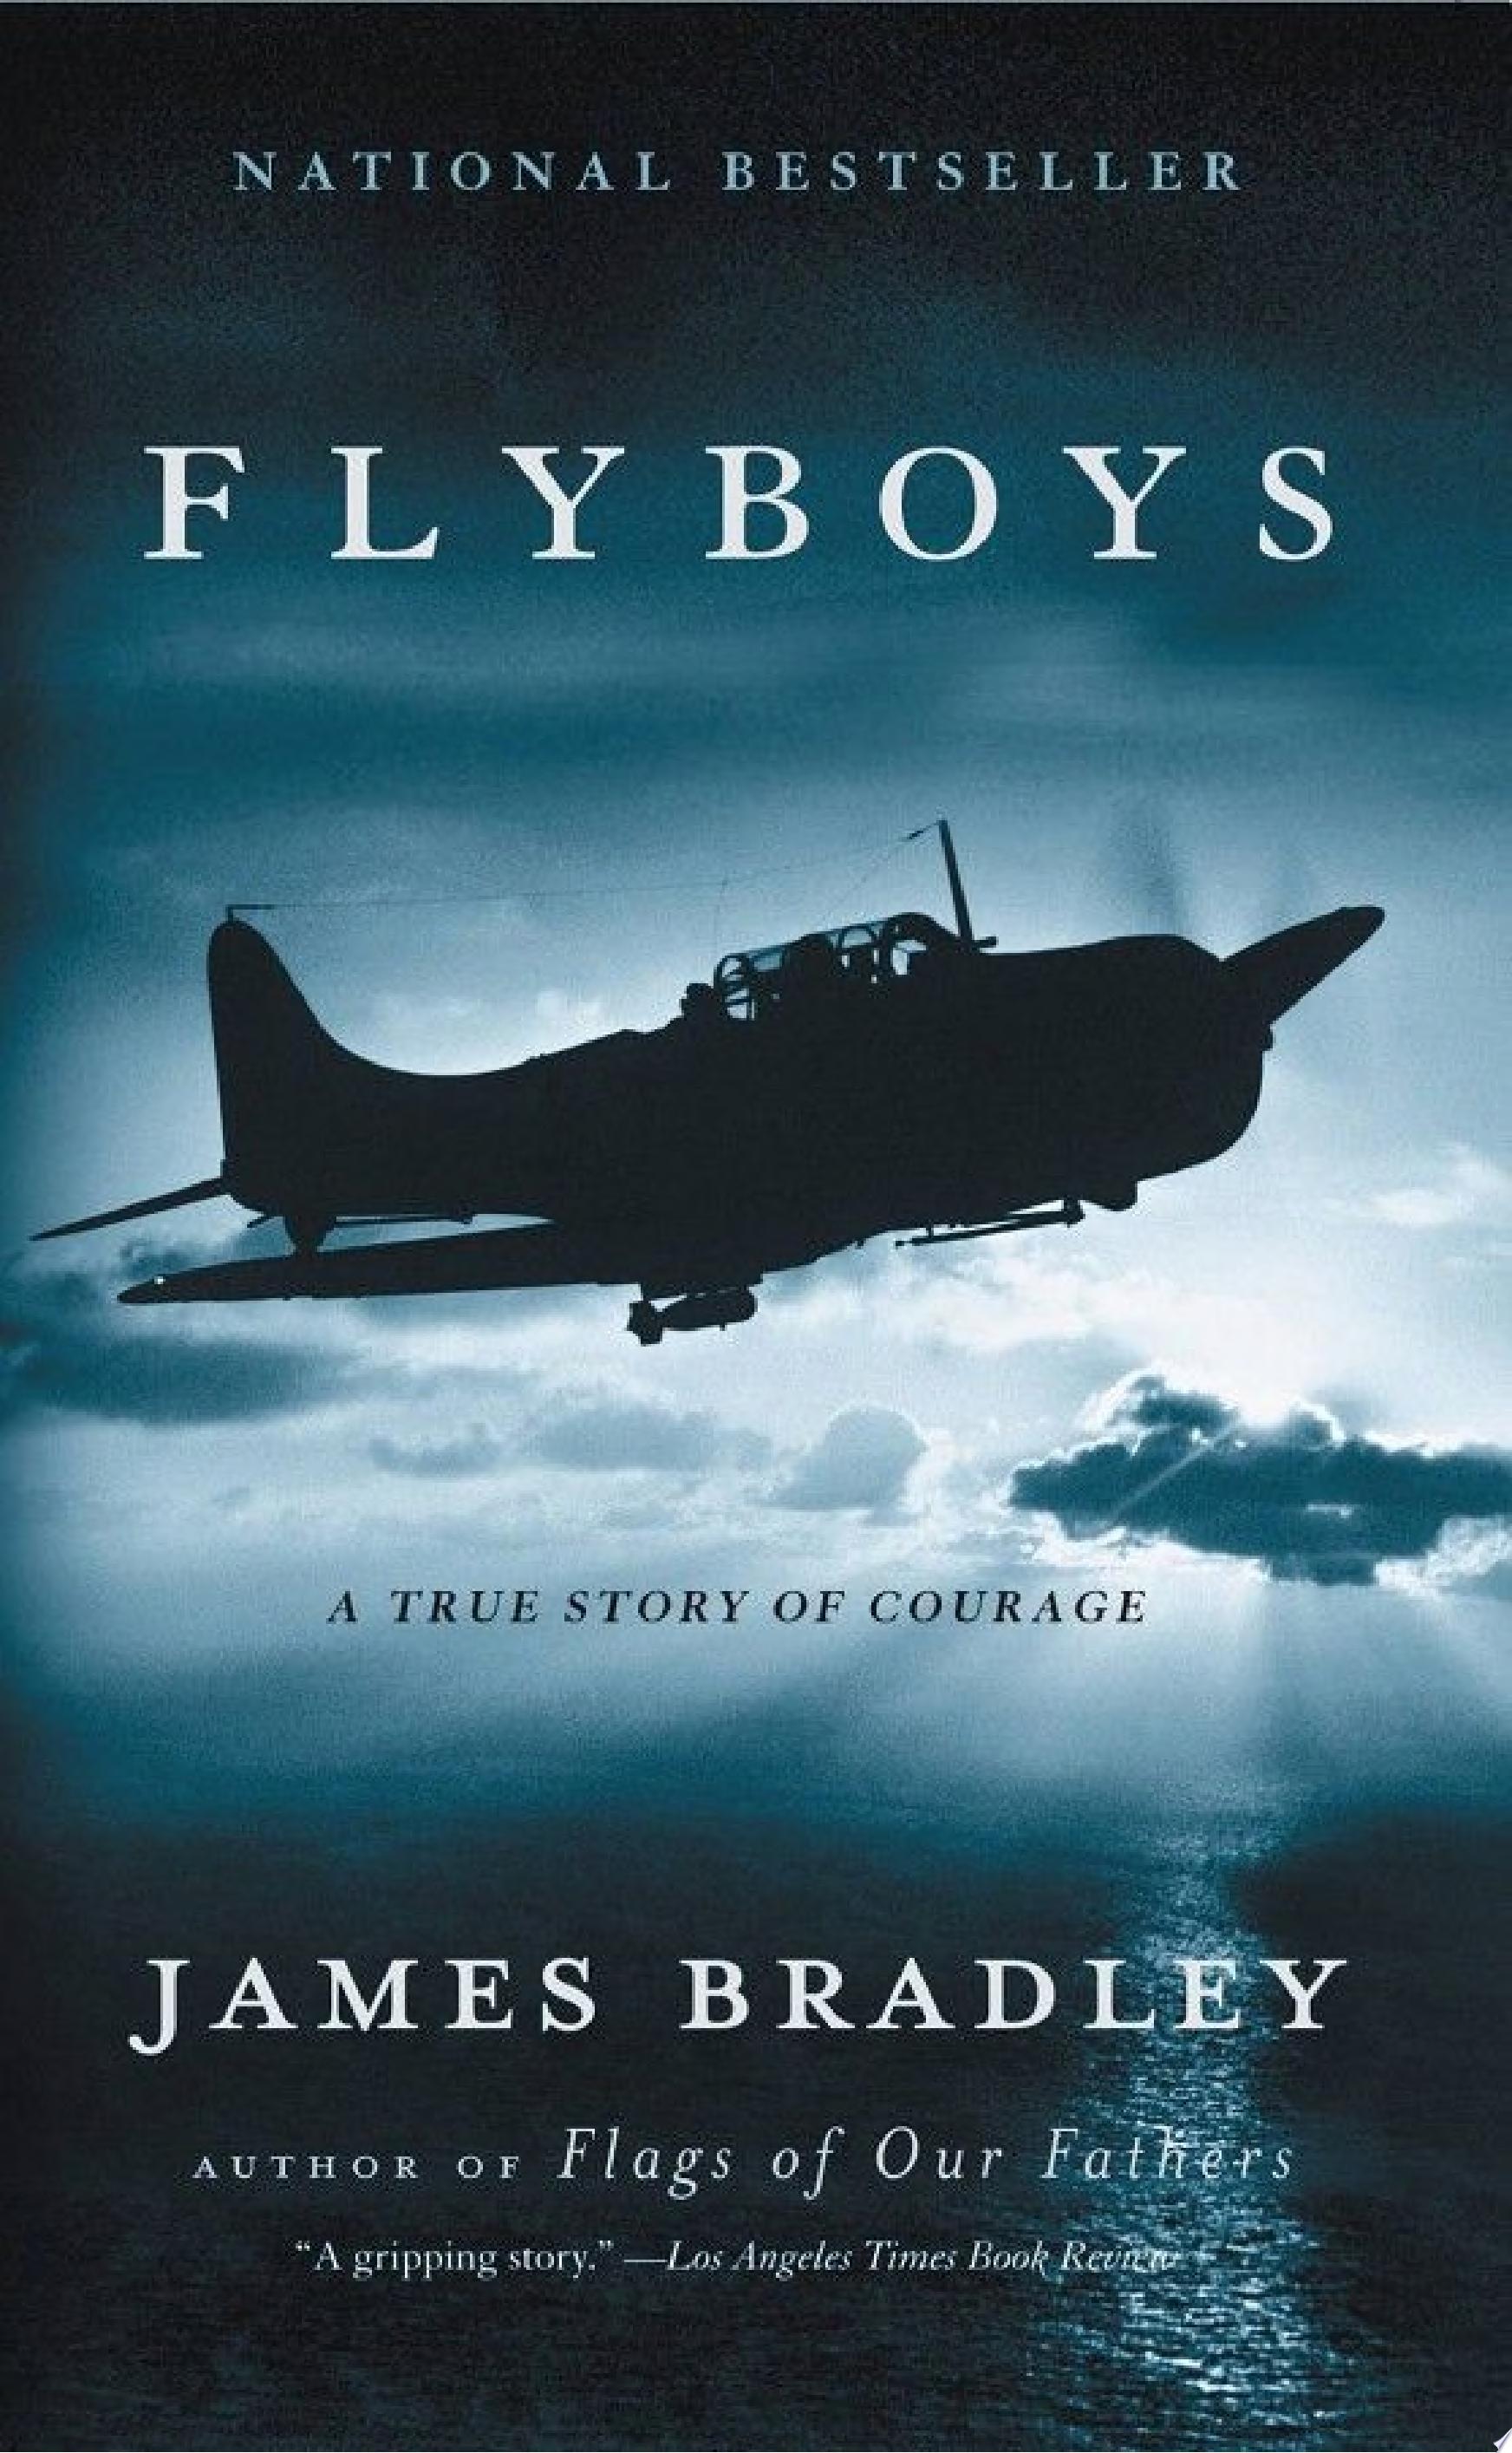 Image for "Flyboys"